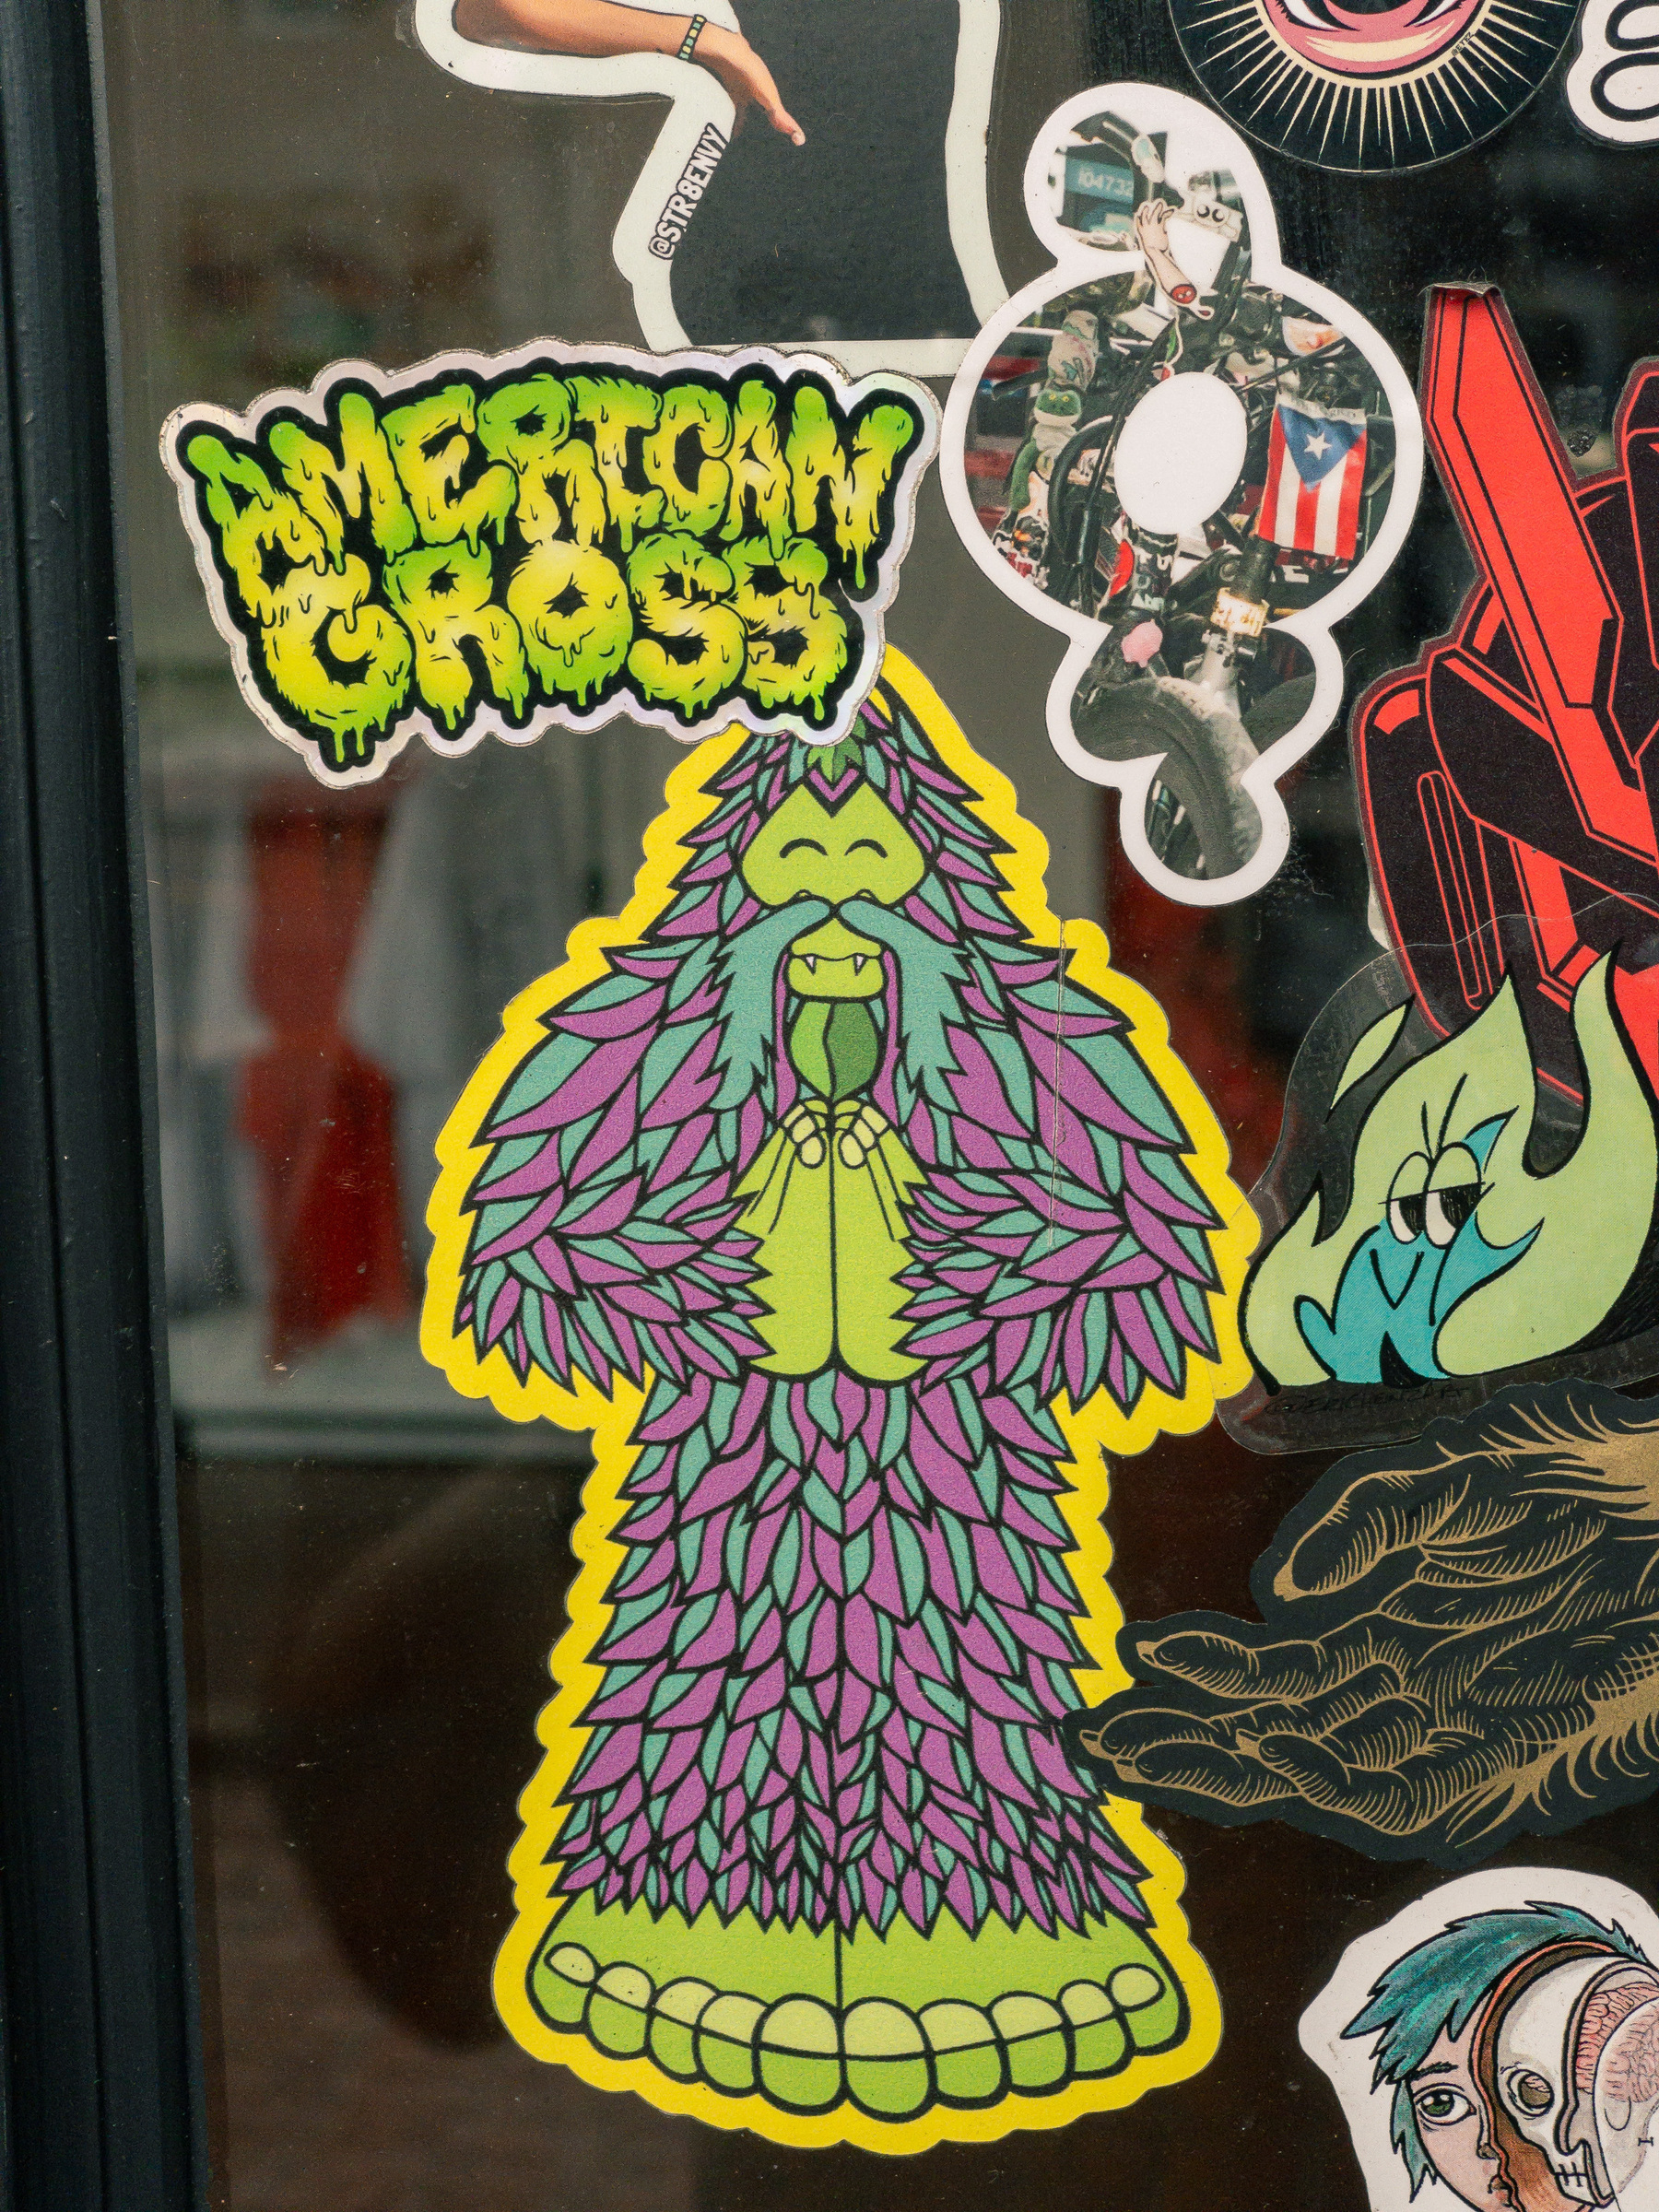 stickers on a window, the main subject is a yeti type monster with the words “american gross” in a banner at the top